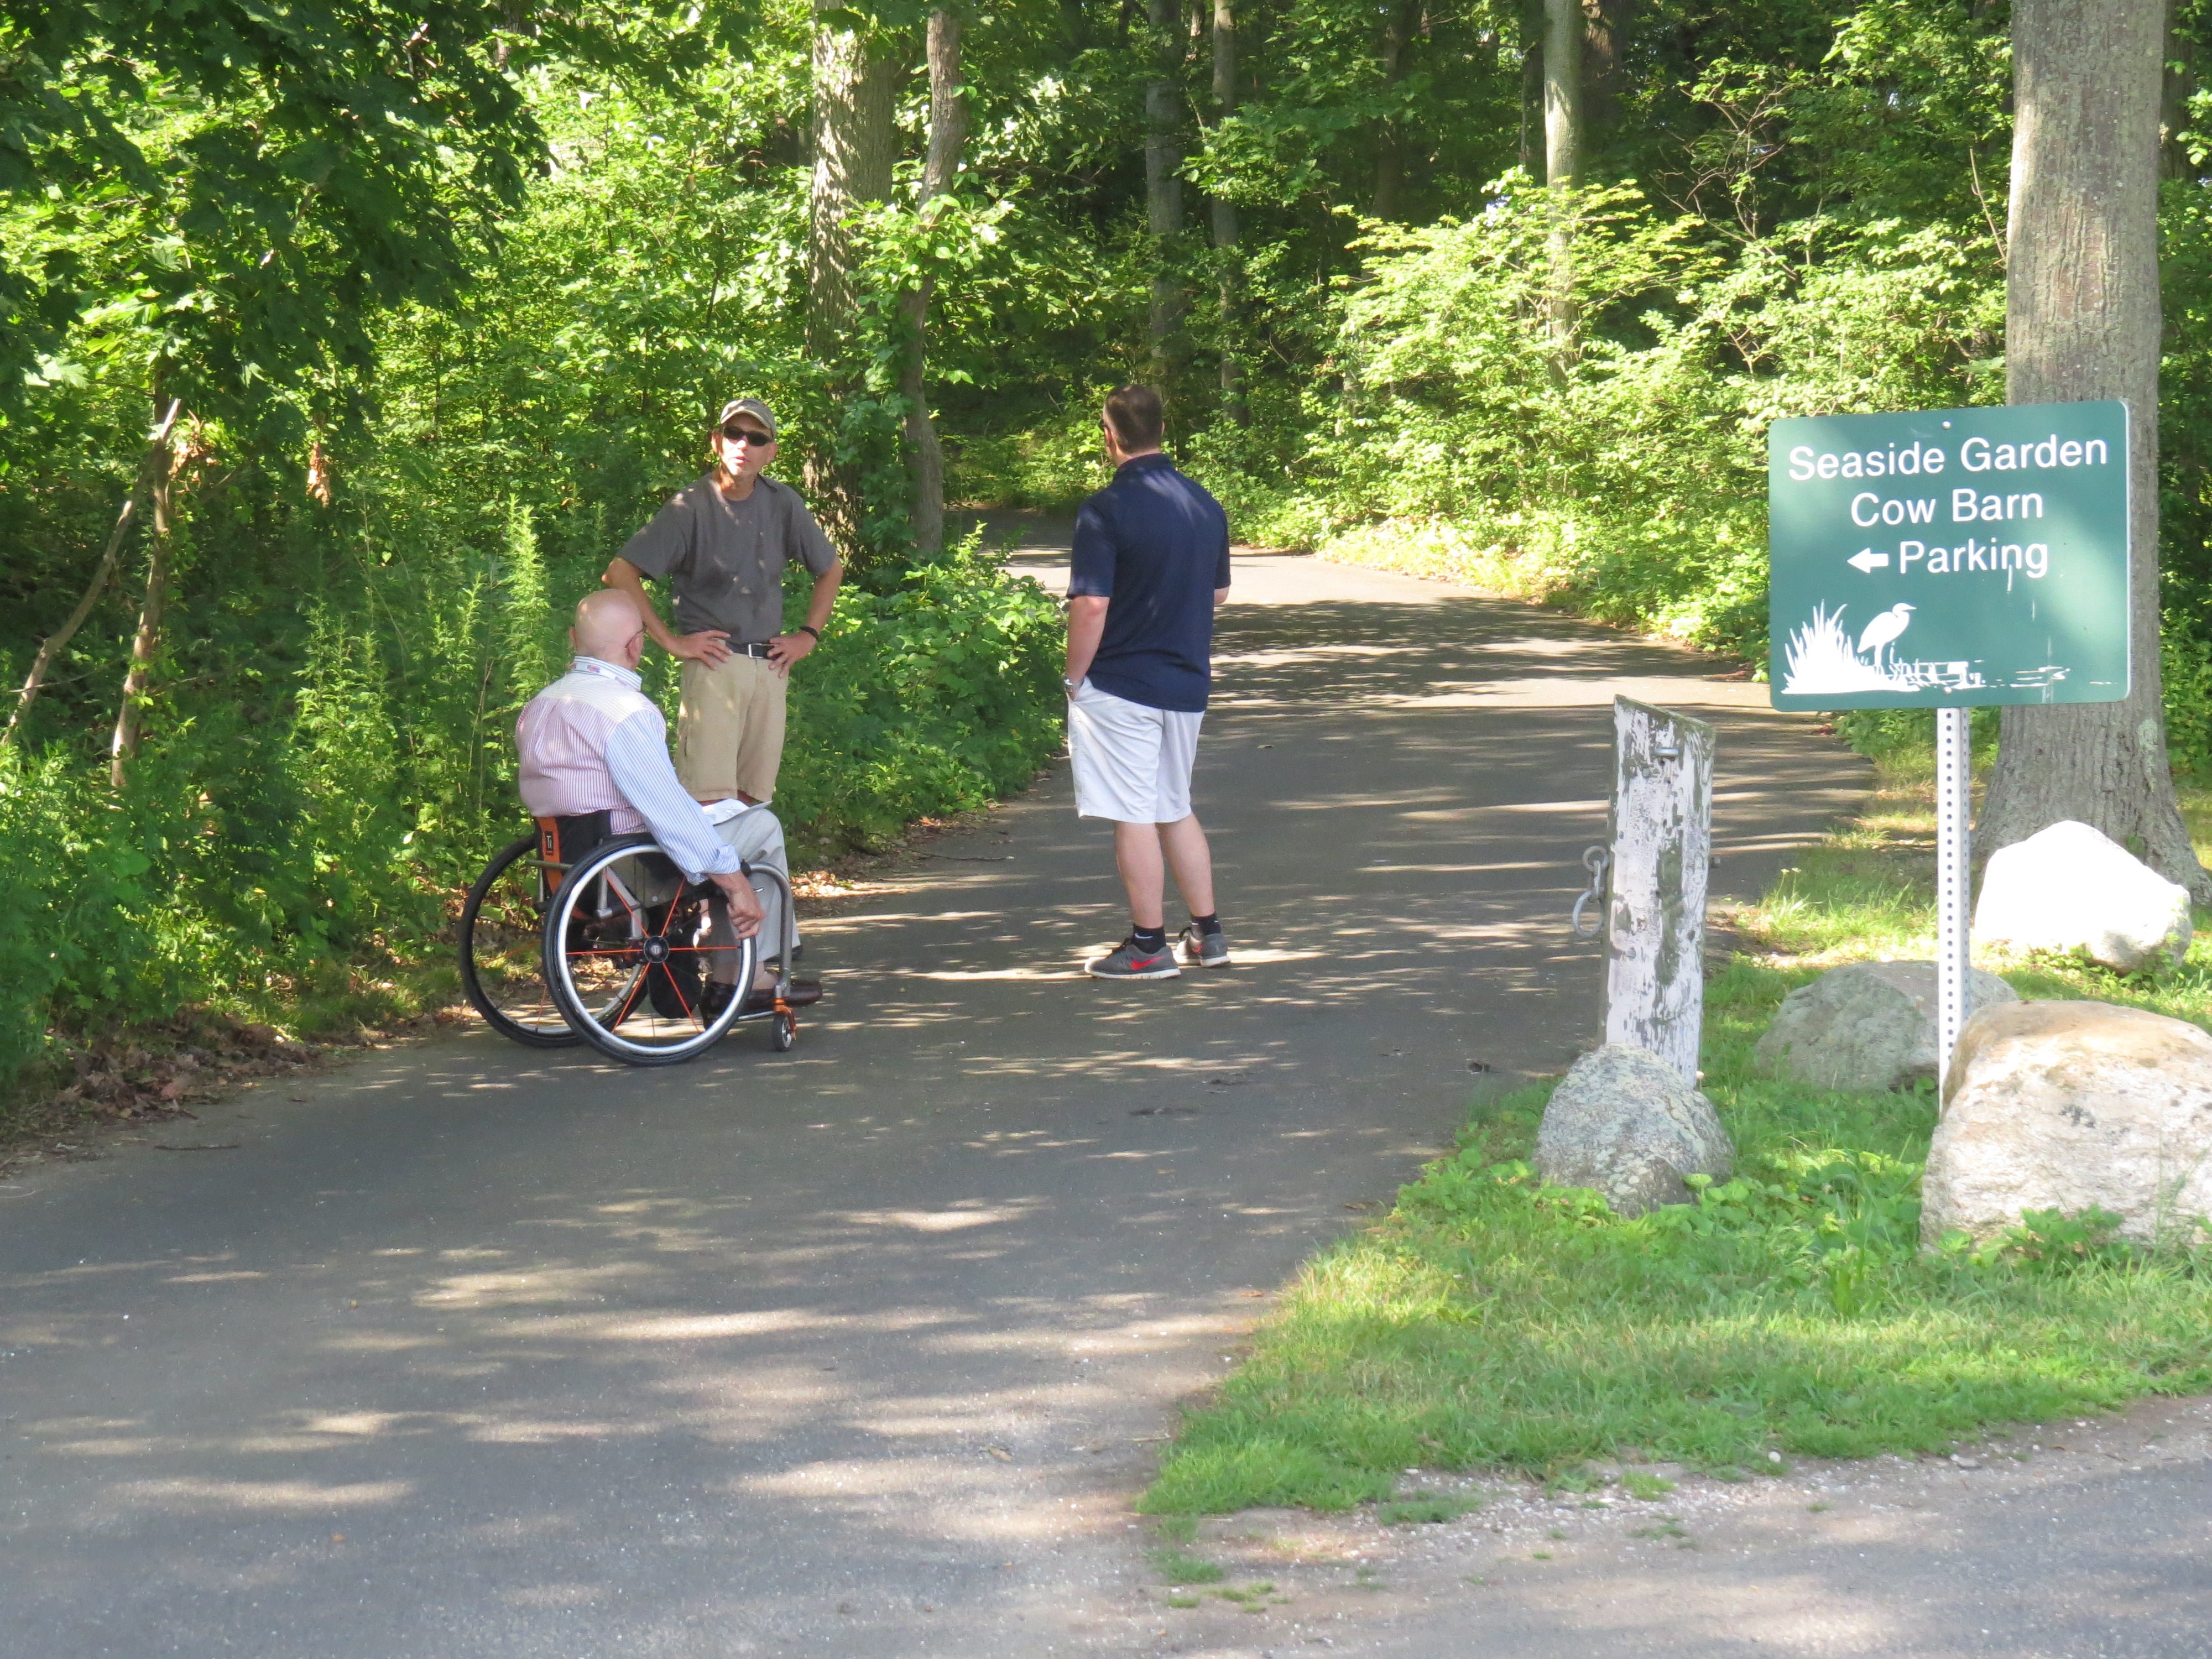 Joe Dowling and Alan Gunzburg agree that this roadway should become a footpath in order for the new bathroom to be accessible. July 19, 2017. Photo: Devon Bedoya